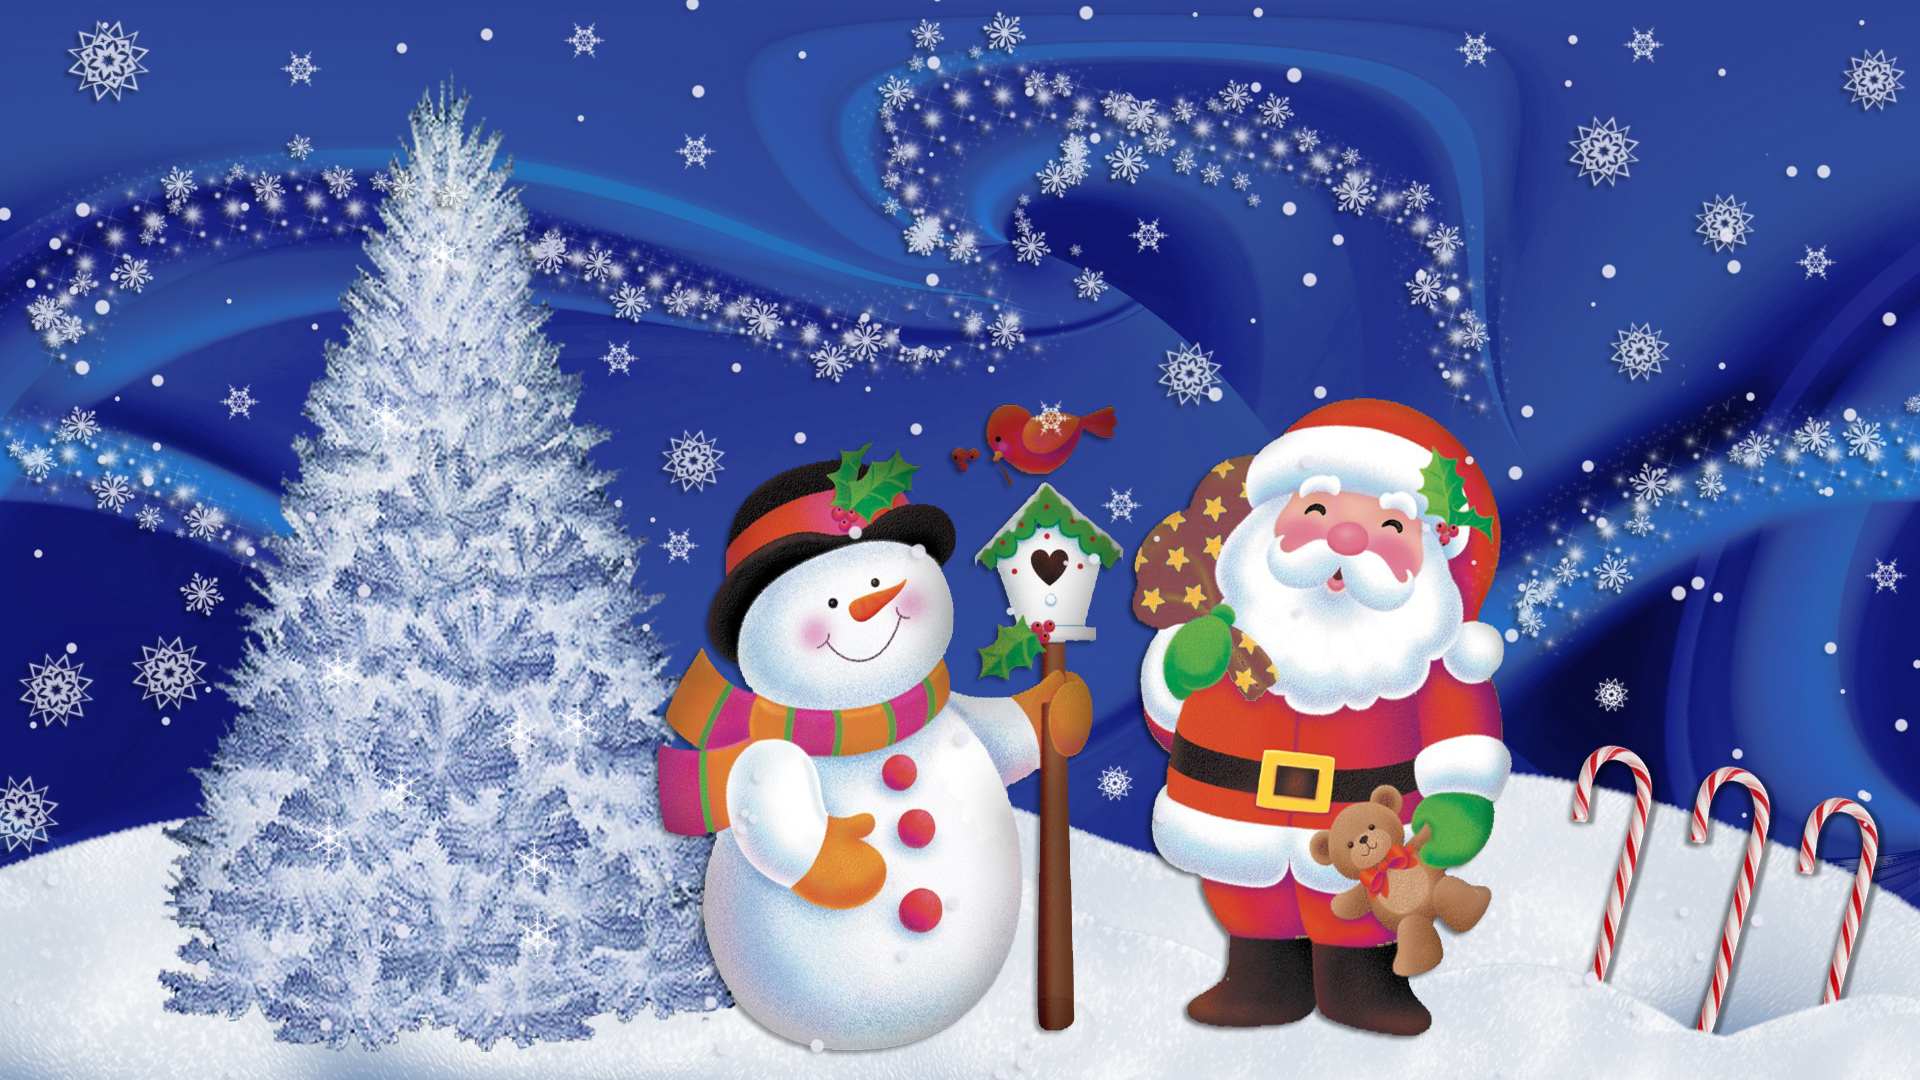 Funny Santa Claus and snowman on Christmas wallpapers and images ...